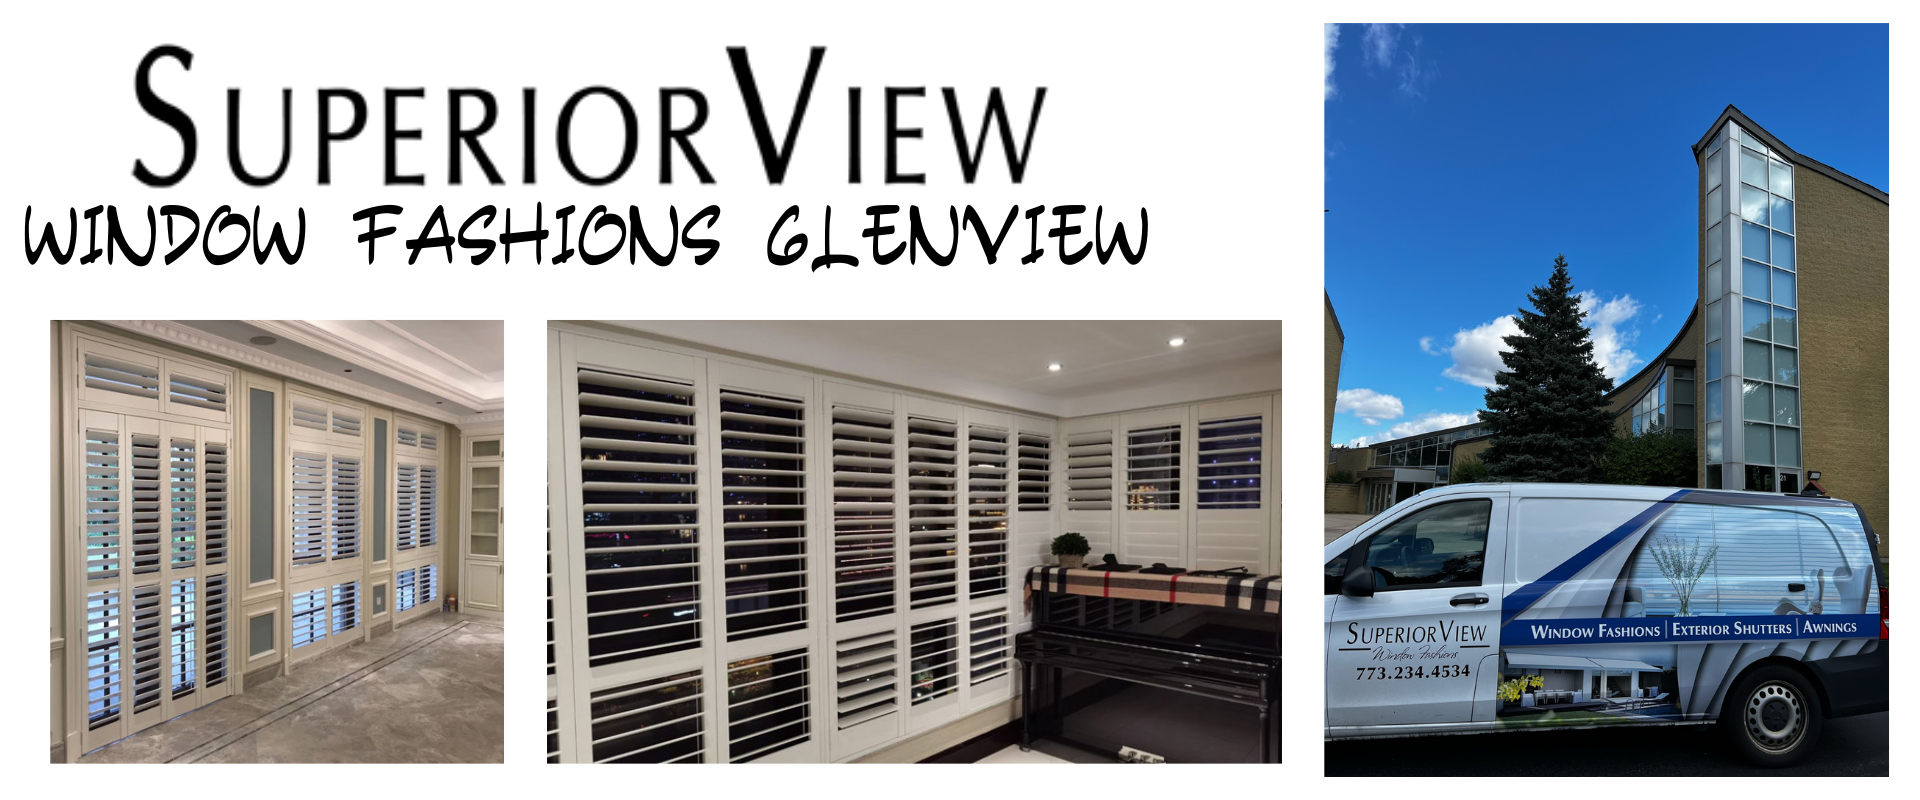 GLENVIEW IL BLINDS & WINDOWS SHADES TREATMENTS